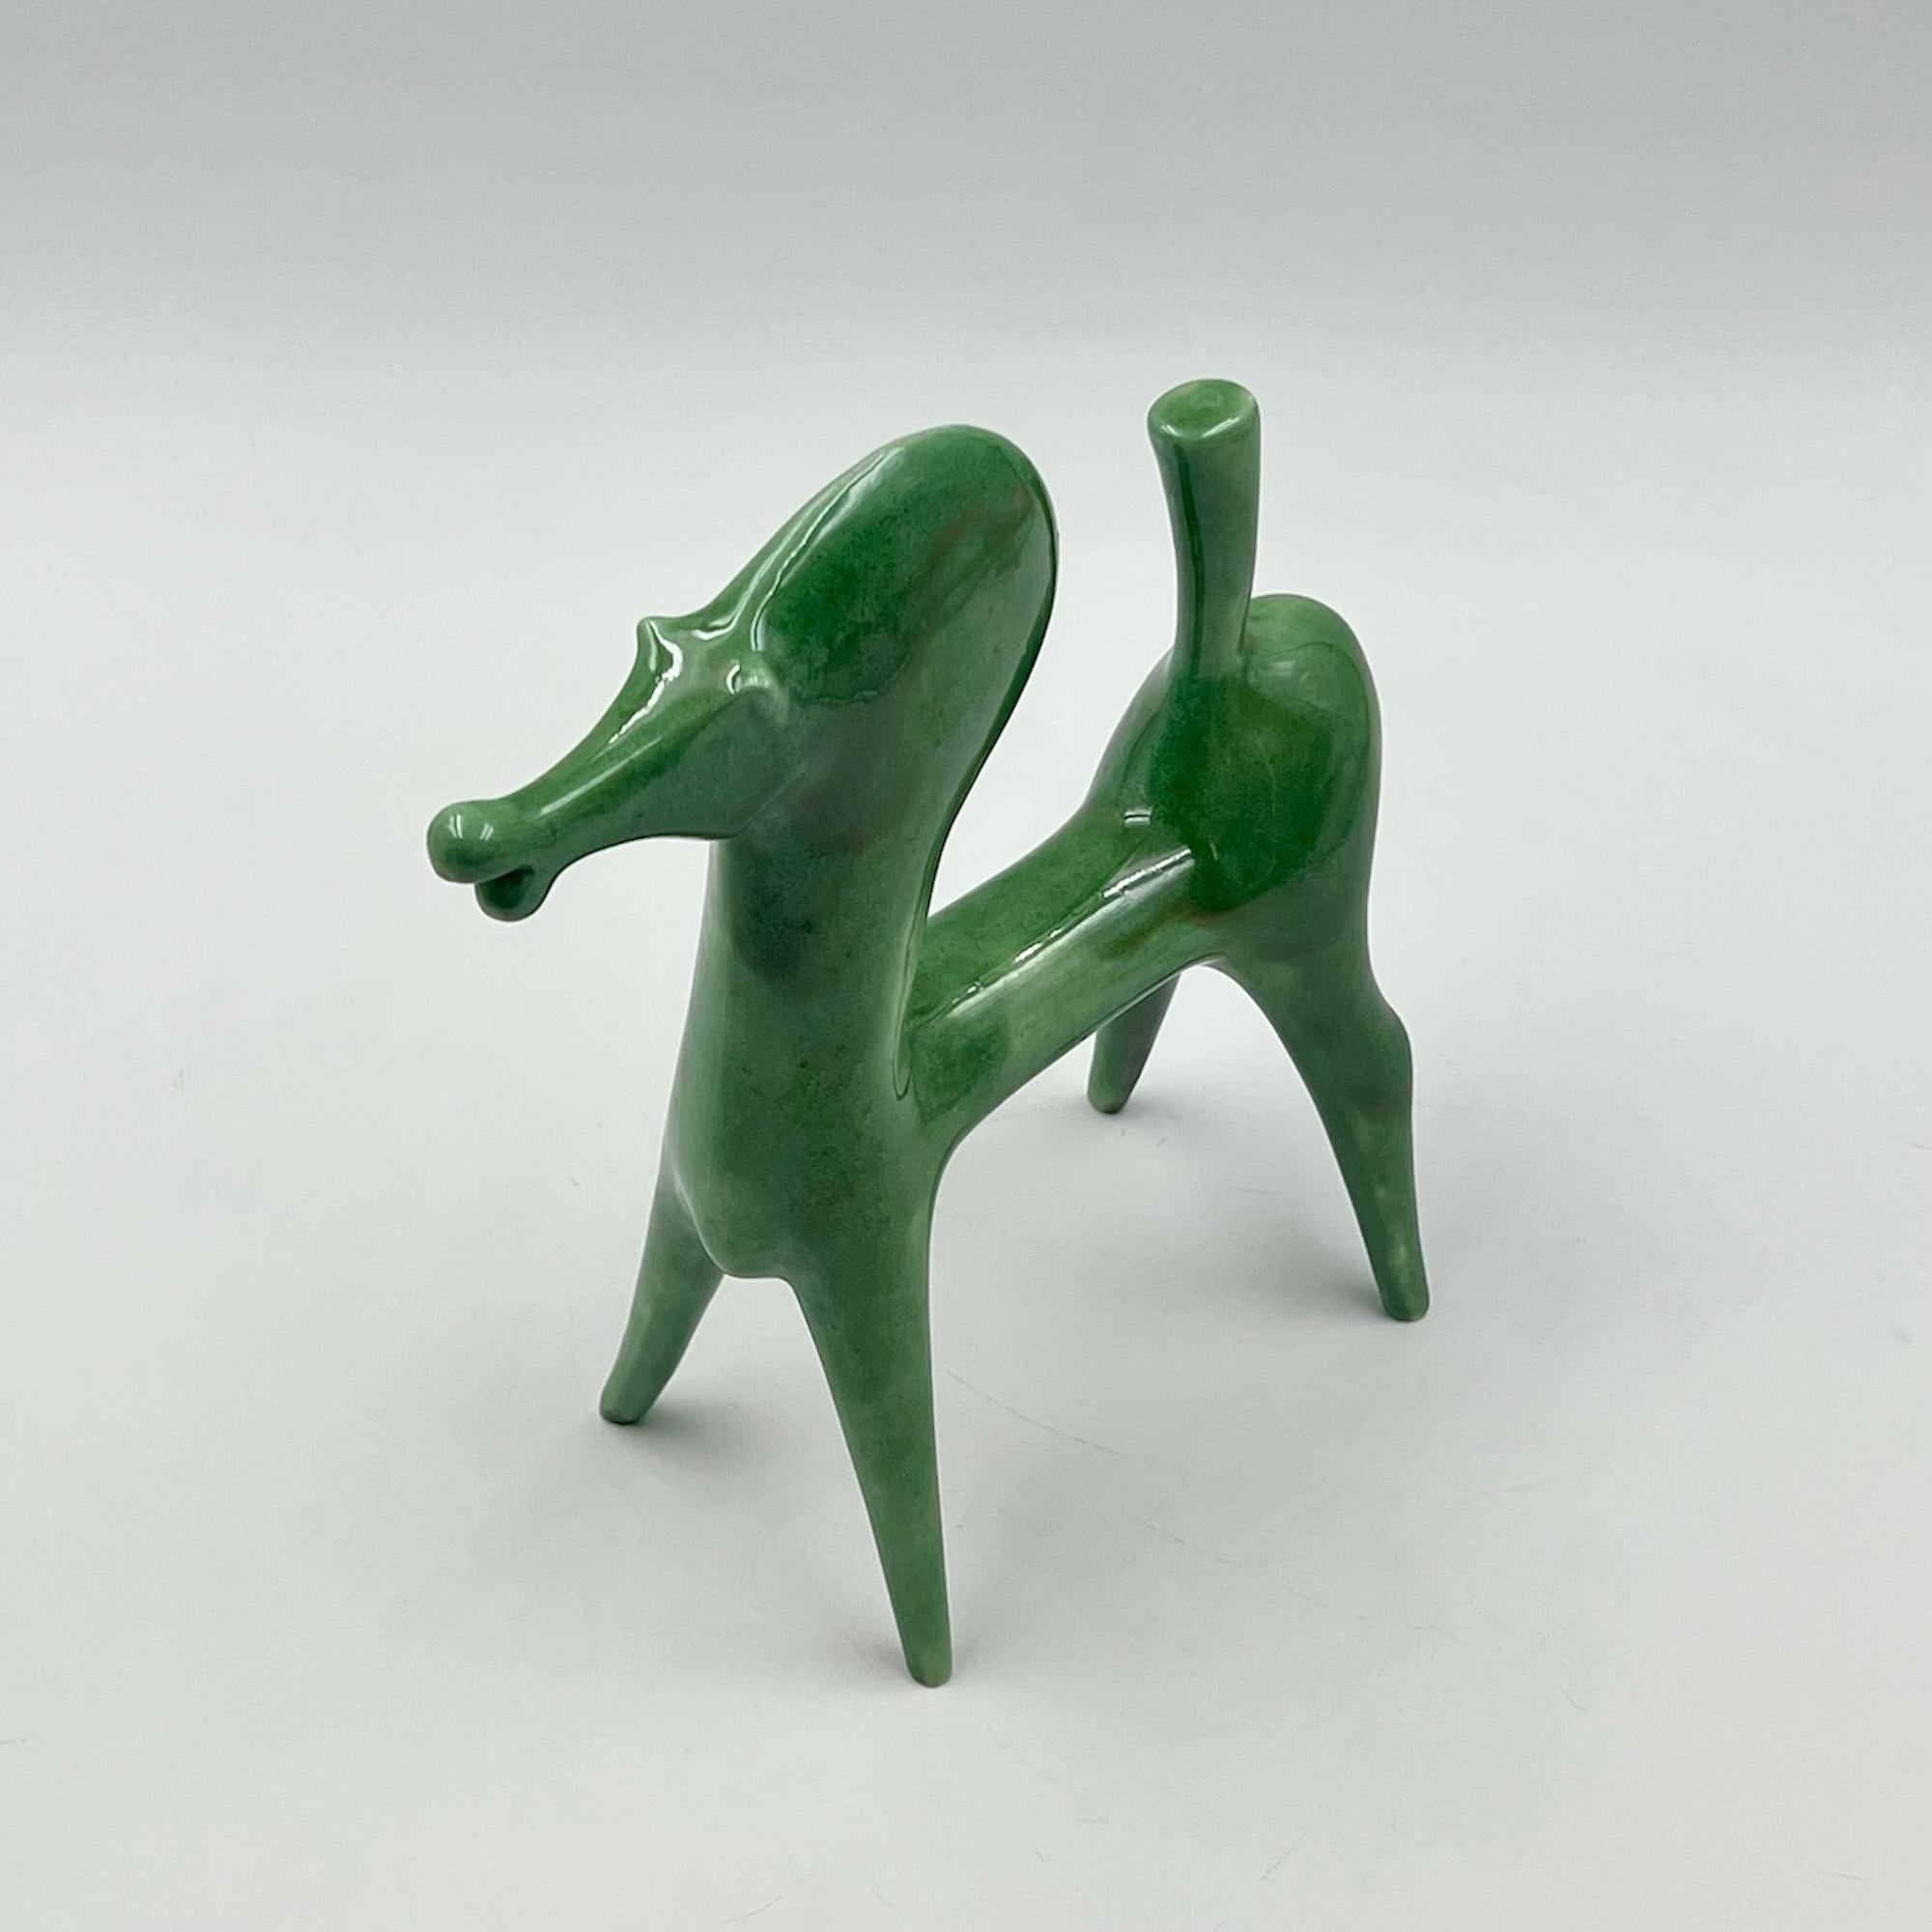 Discover a rare and captivating piece of 1970s art by renowned Italian artist Roberto Rigon. This exquisite green ceramic horse figurine epitomizes the unique charm and artistic flair that Rigon’s work is celebrated for. Crafted in Italy during the